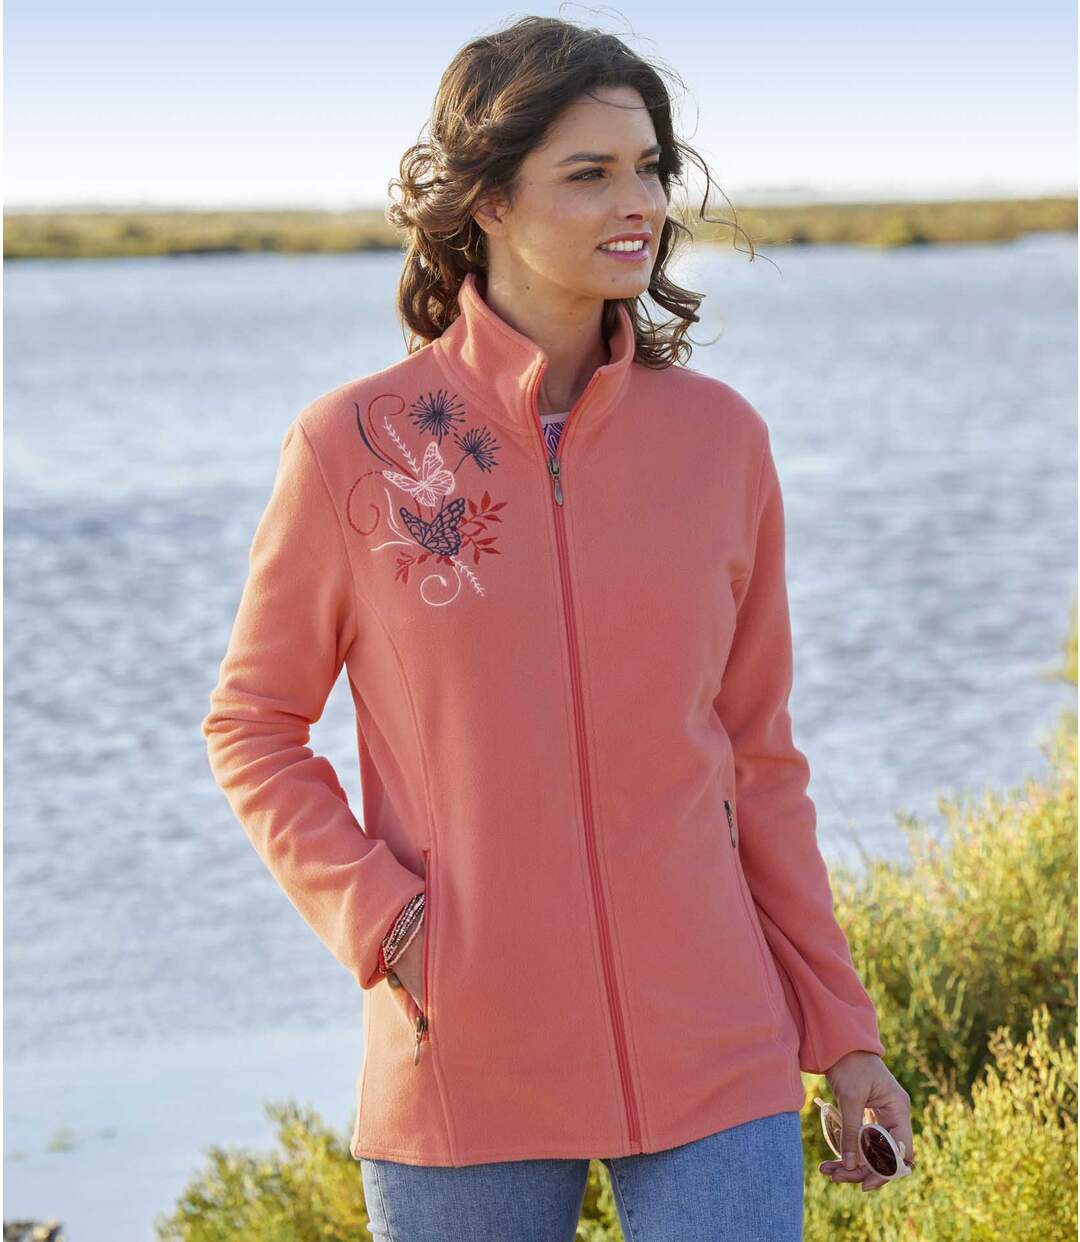 Pack of 2 Women's Embroidered Microfleece Jackets - Pink Sky Blue Atlas For Men